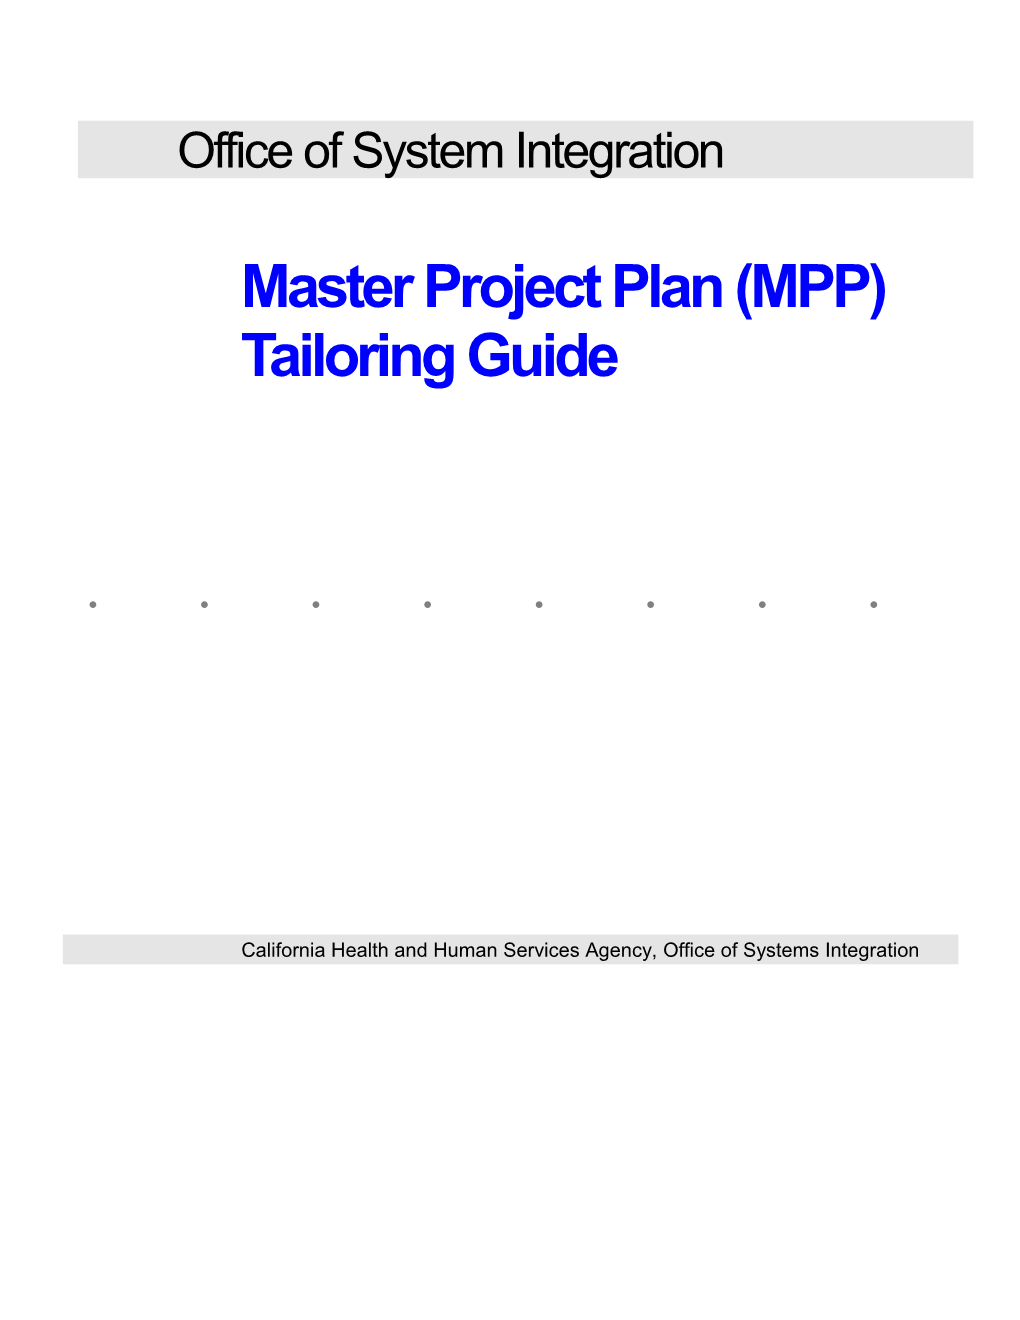 OSI Master Project Plan (MPP) Tailoring Guide